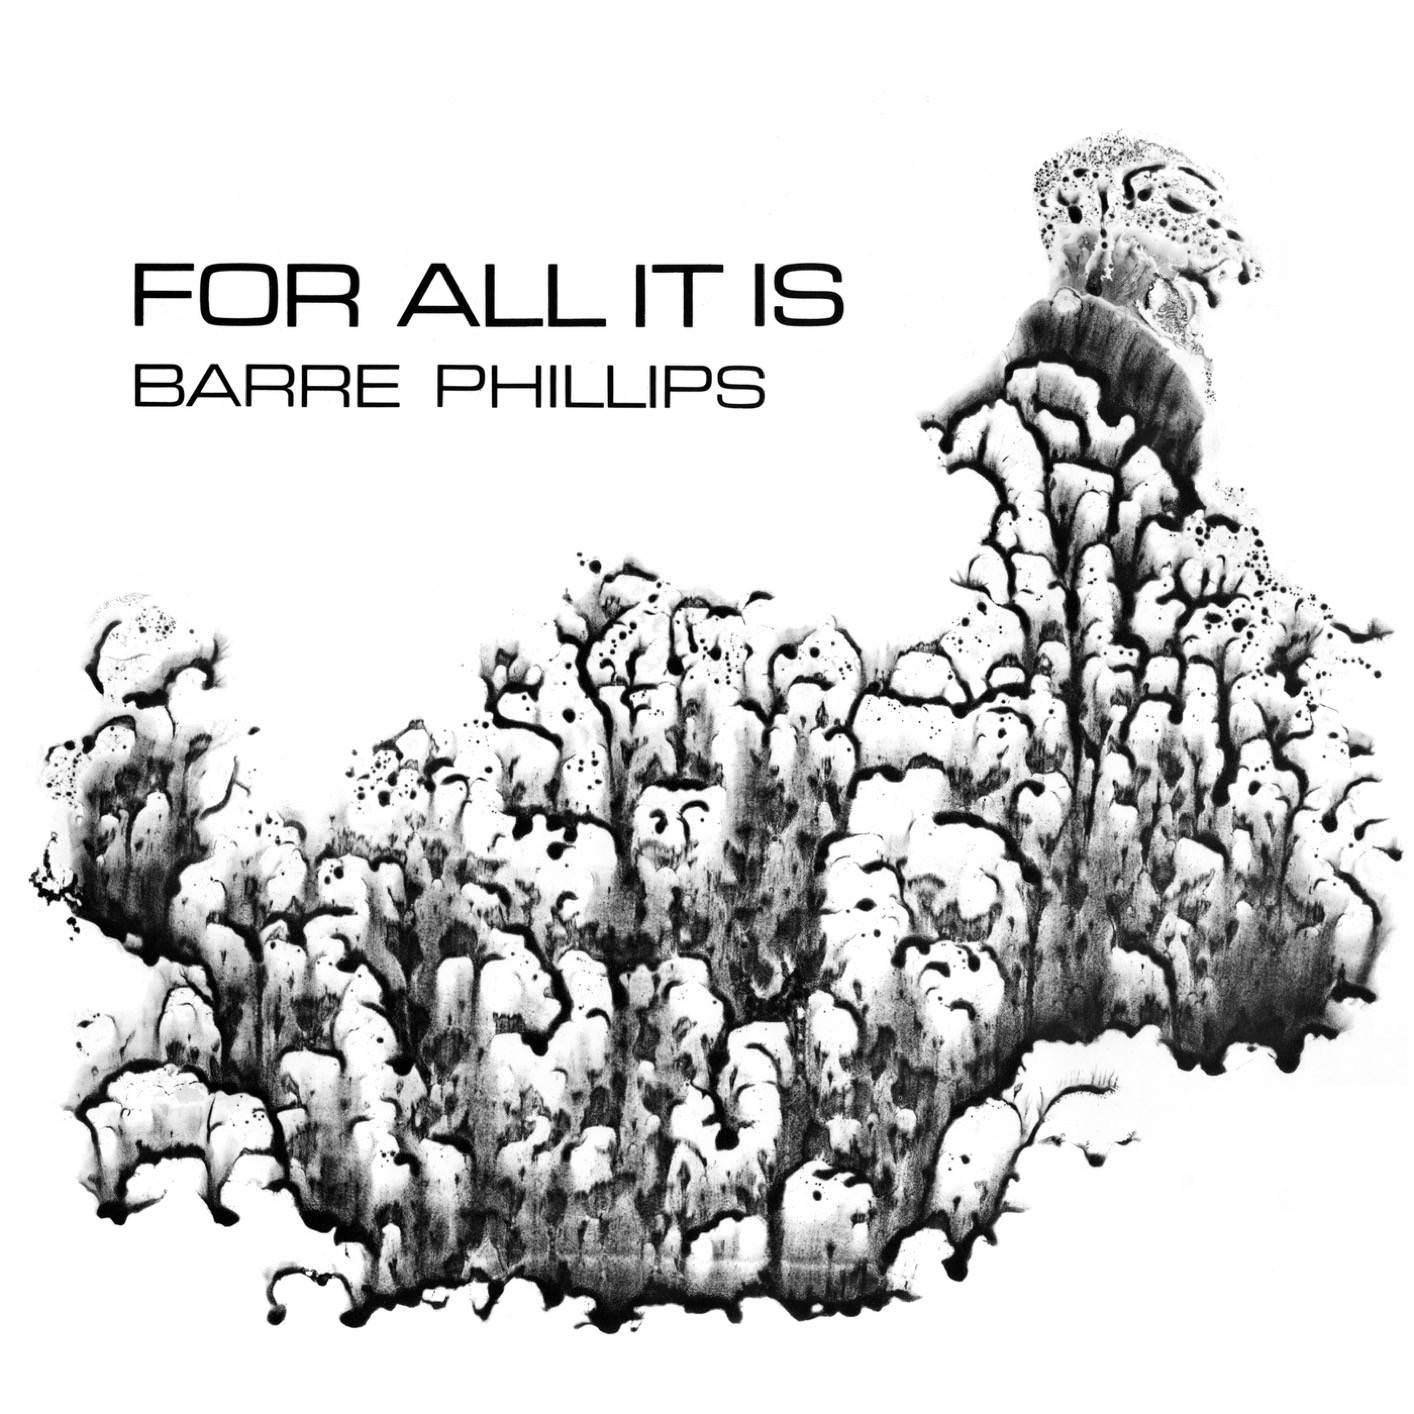 Barre Phillips – For All It Is (1973/2018) [FLAC 24bit/96kHz]